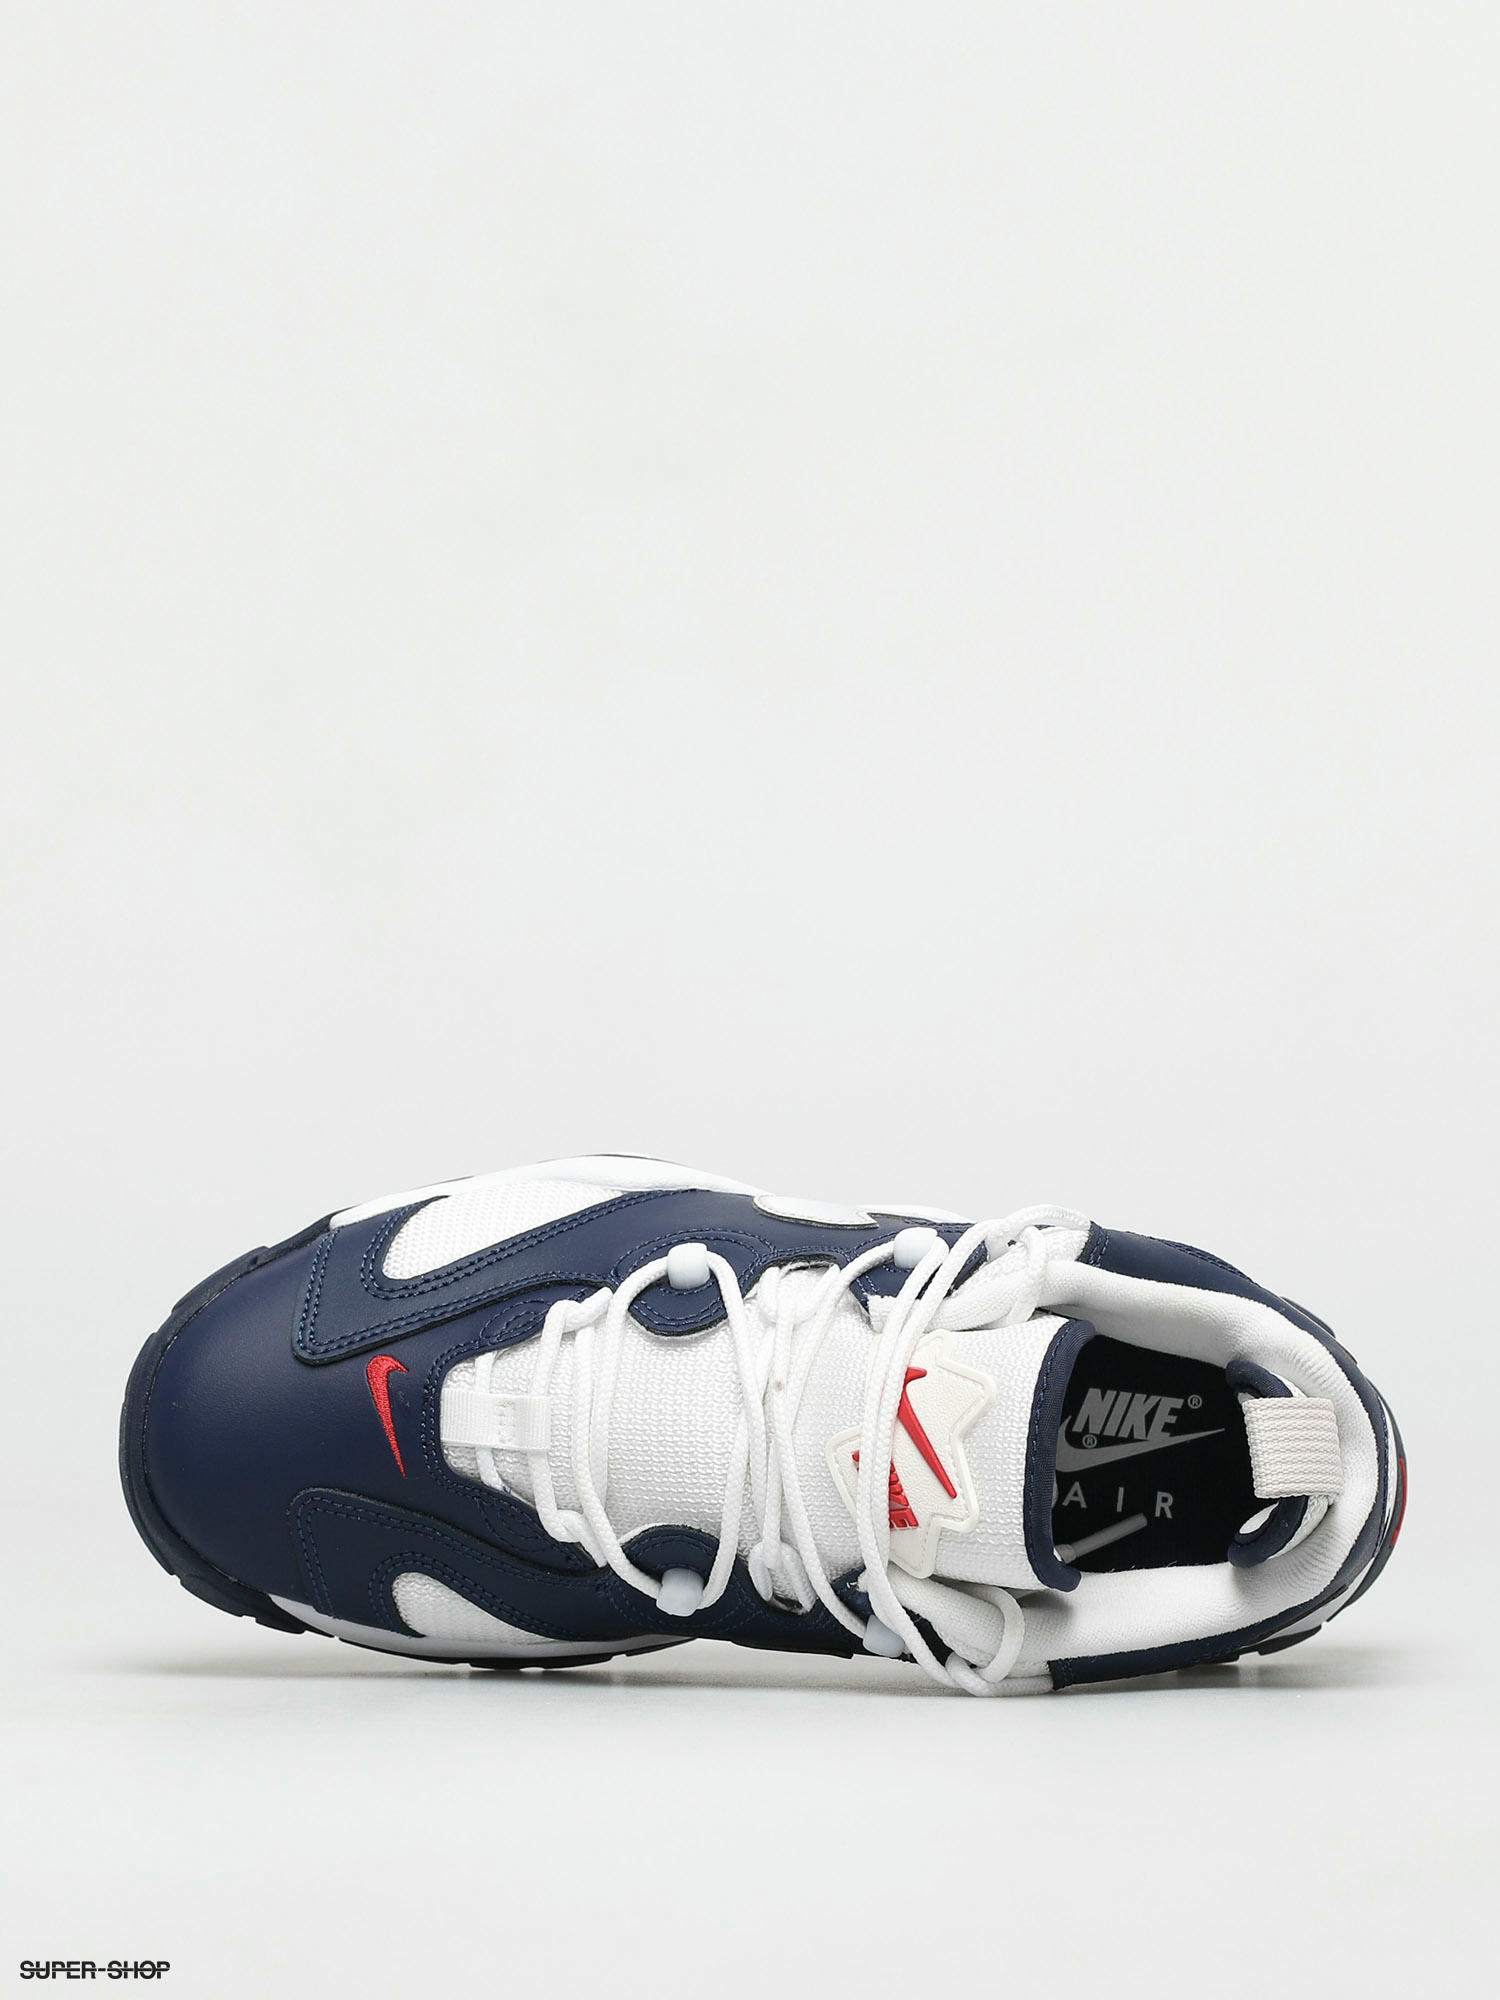 Nike Air Barrage Low 'USA' Midnight Navy White Shoes CN0060 400